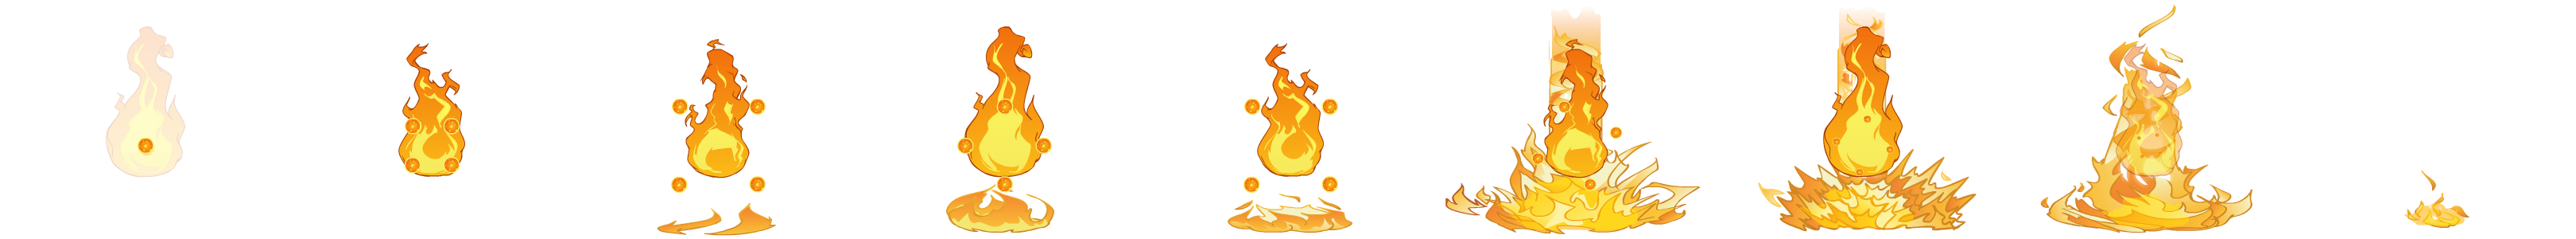 https://images.neopets.com/bd2/items/ranged/magic_fire.png